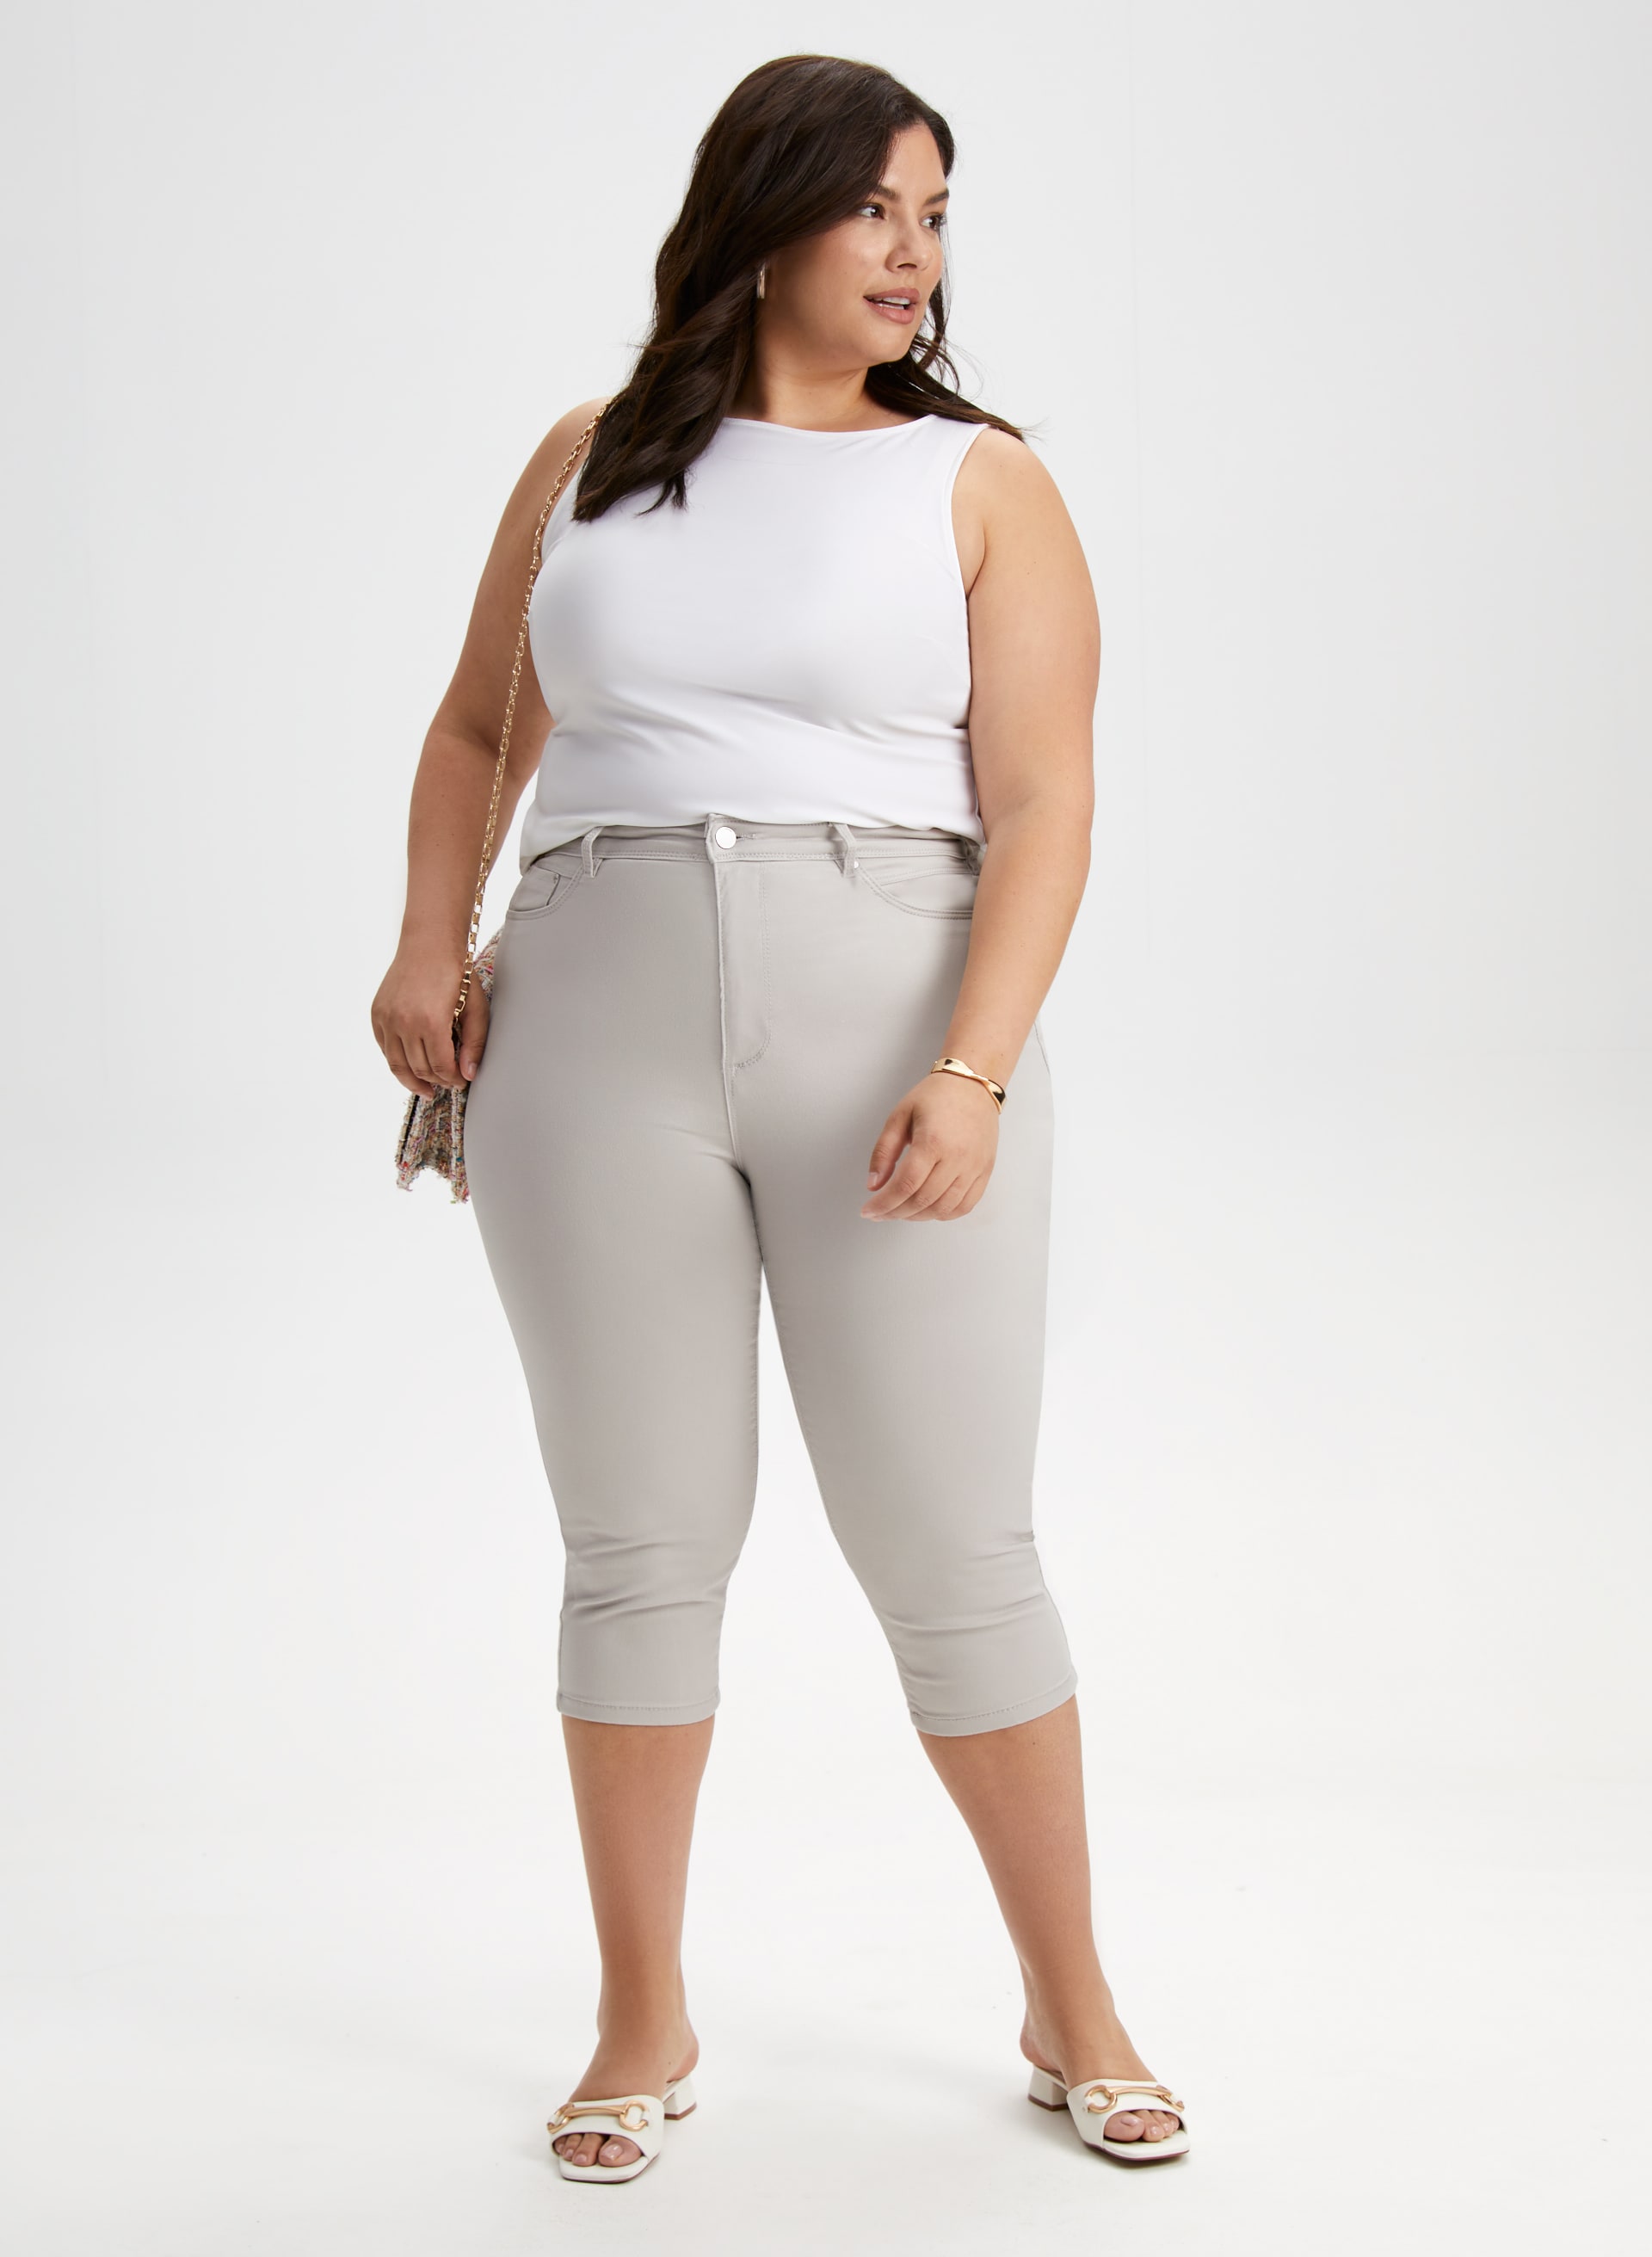 Plus Size Maternity Clothes | Pregnancy Clothing | maurices